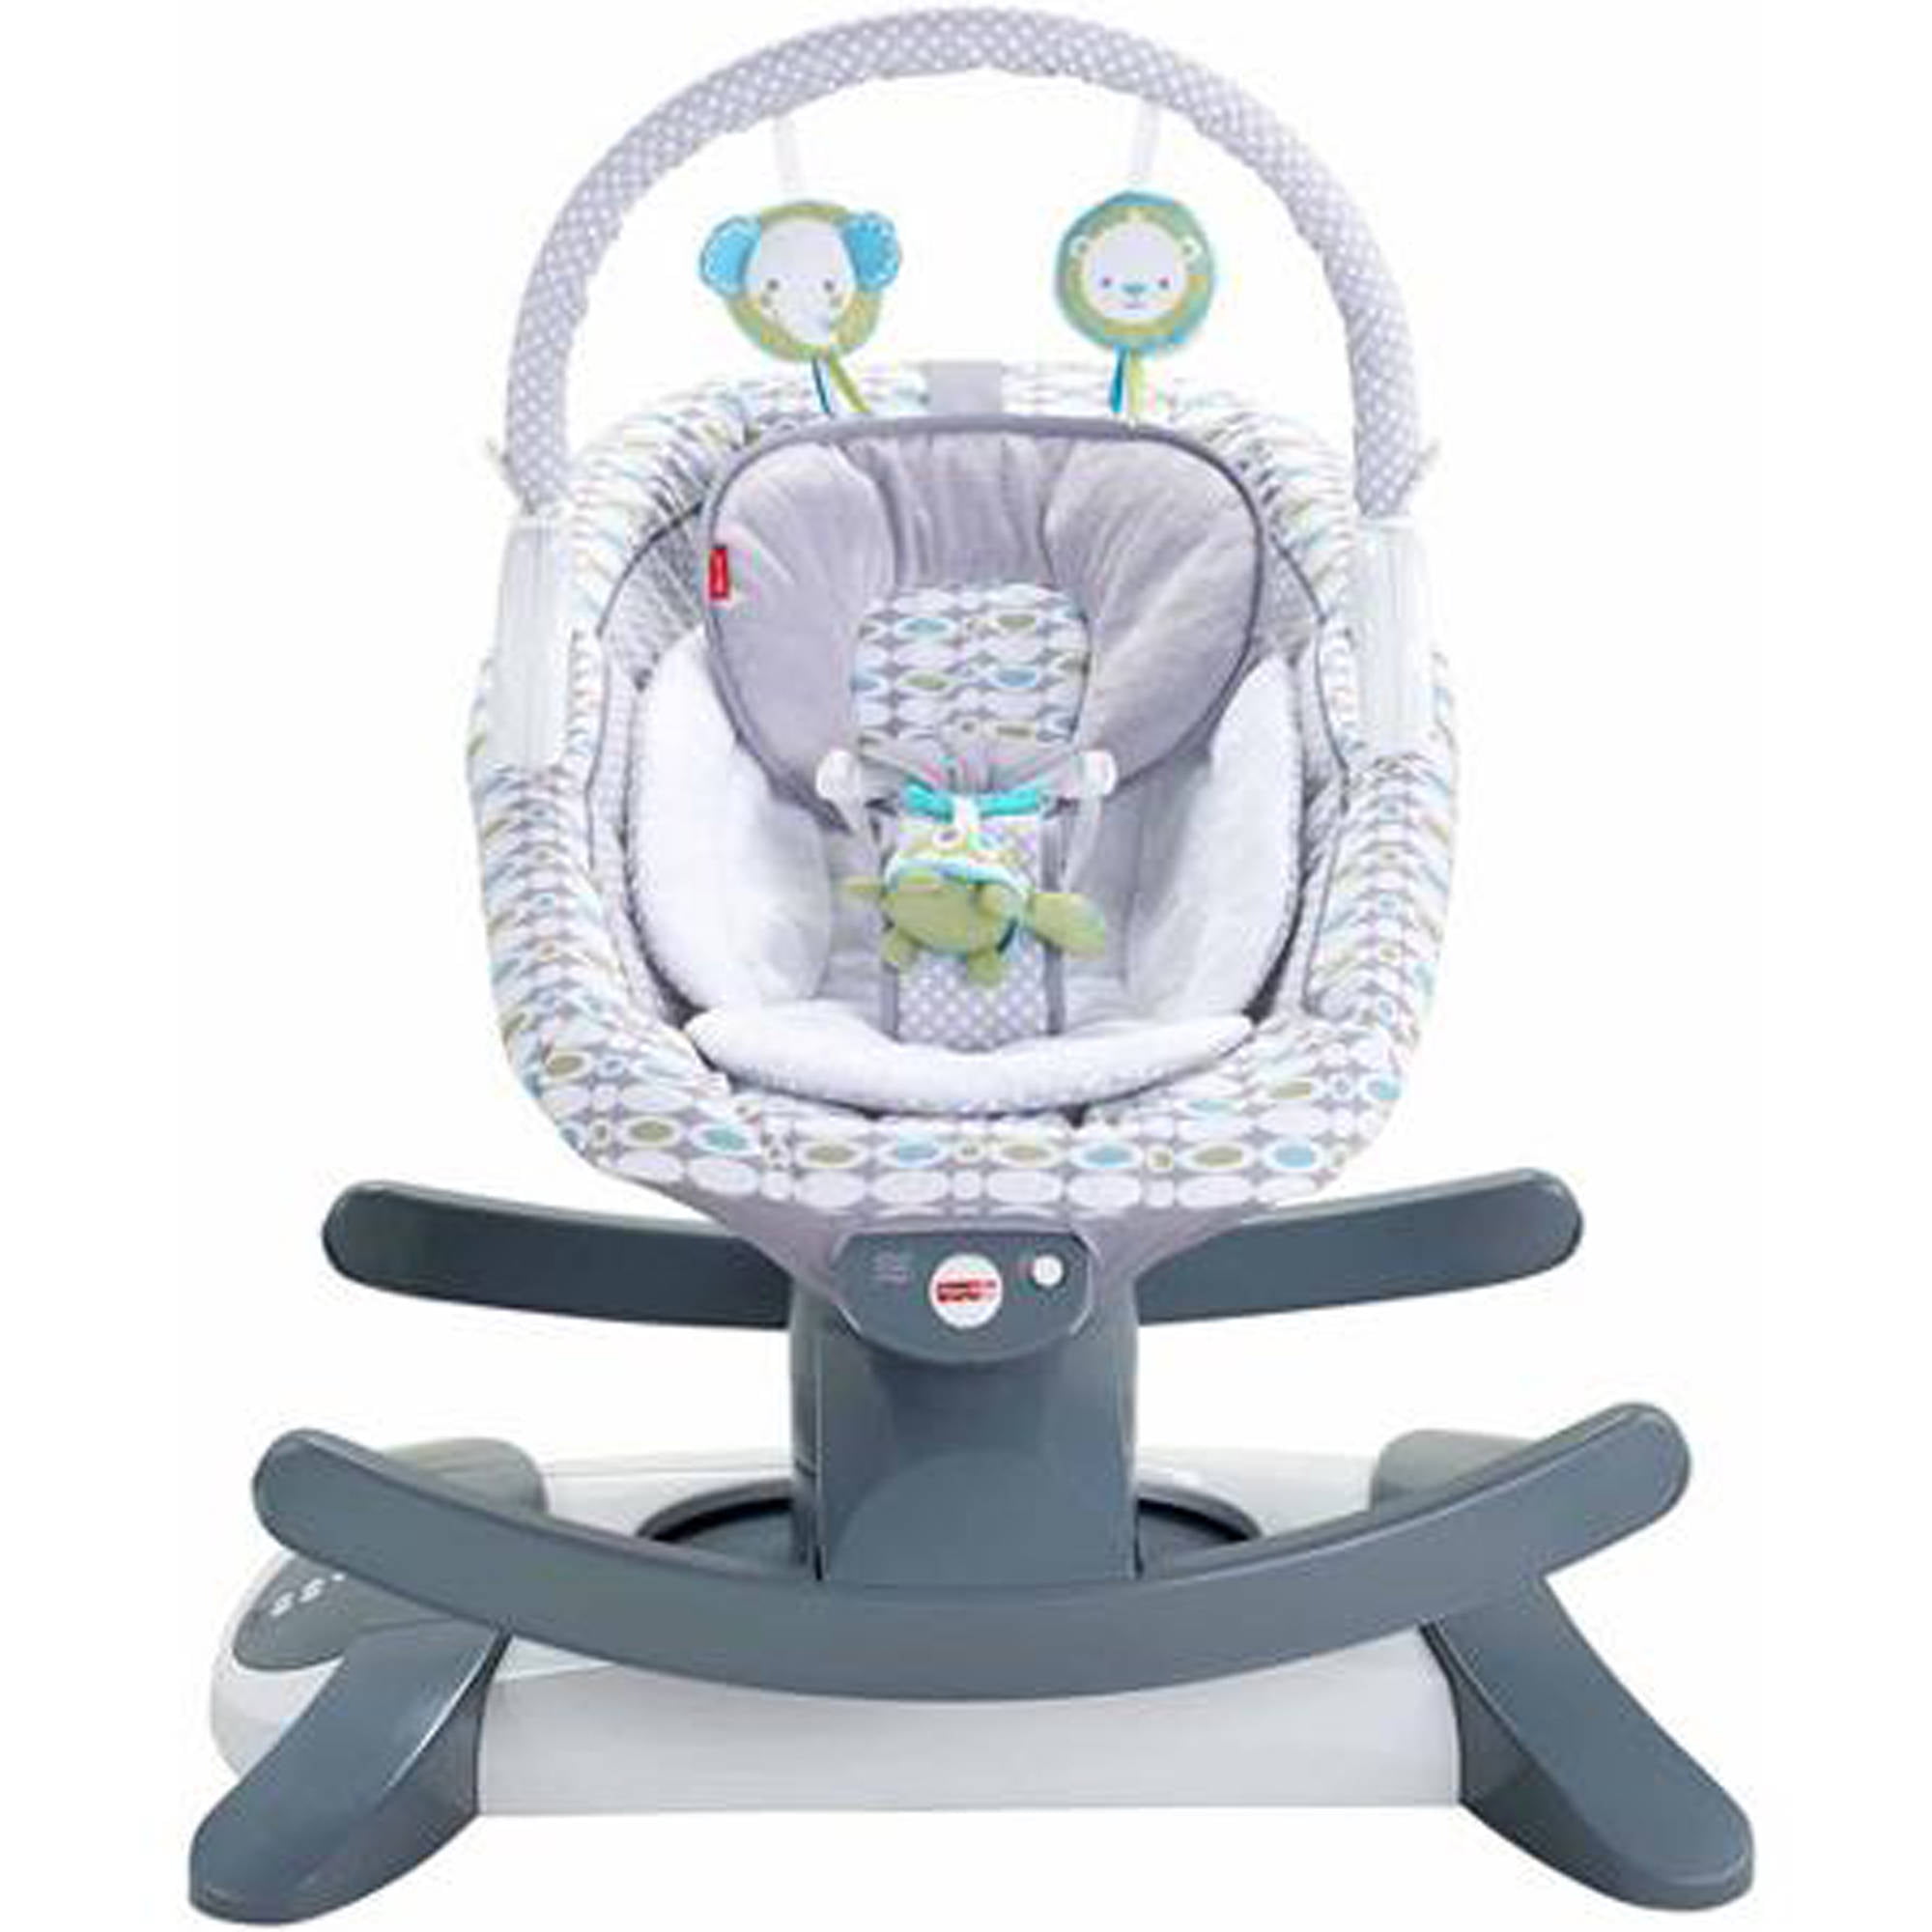 rock and glide baby swing